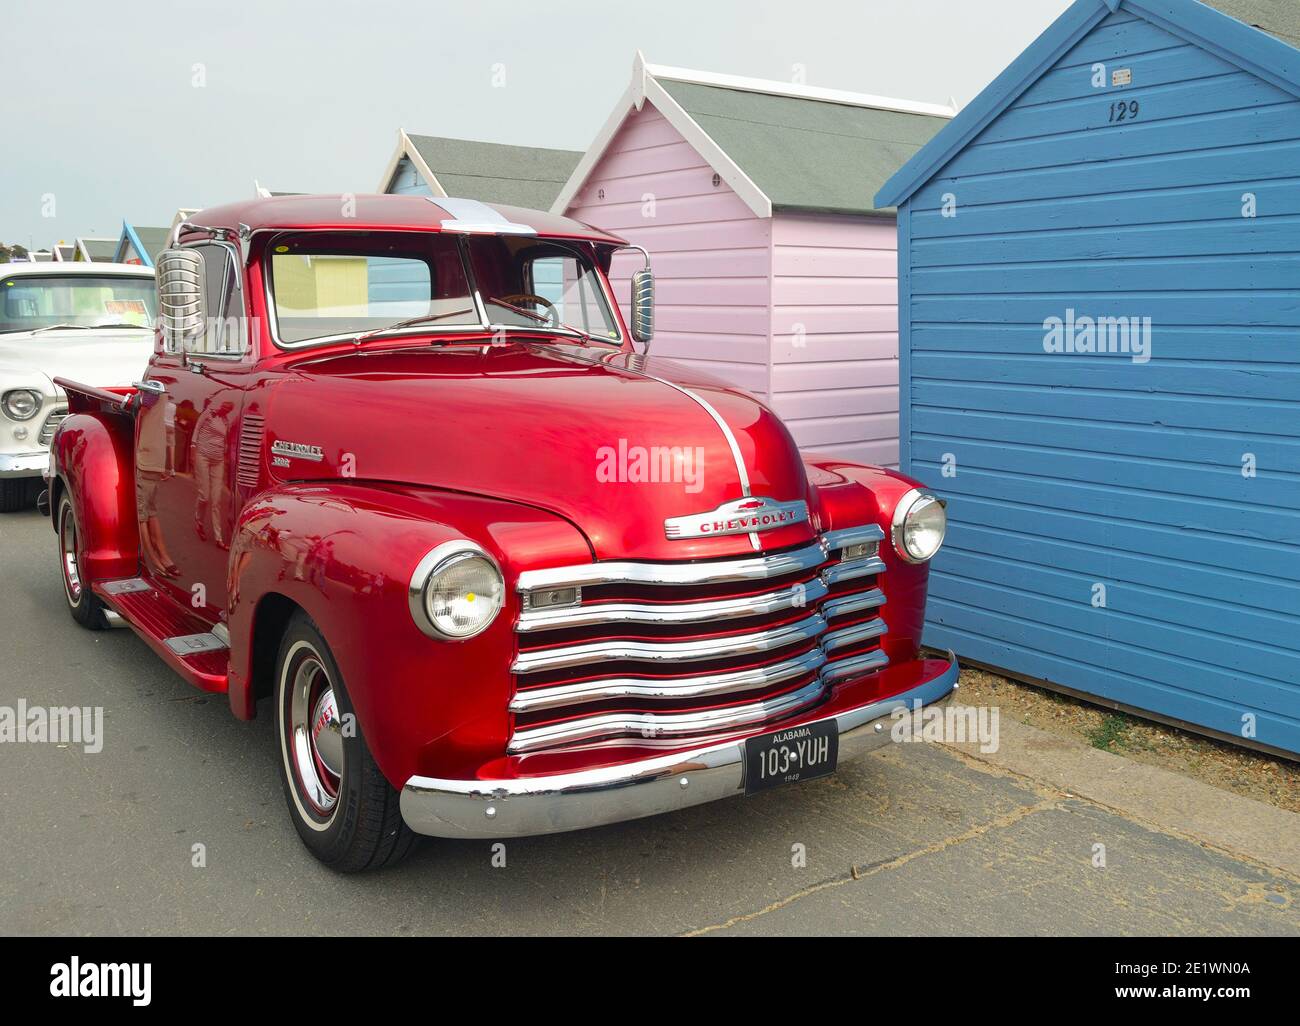 Classic Red  Chevrolet 3100 pickup truck on seafront promenade in front of beach huts. Stock Photo